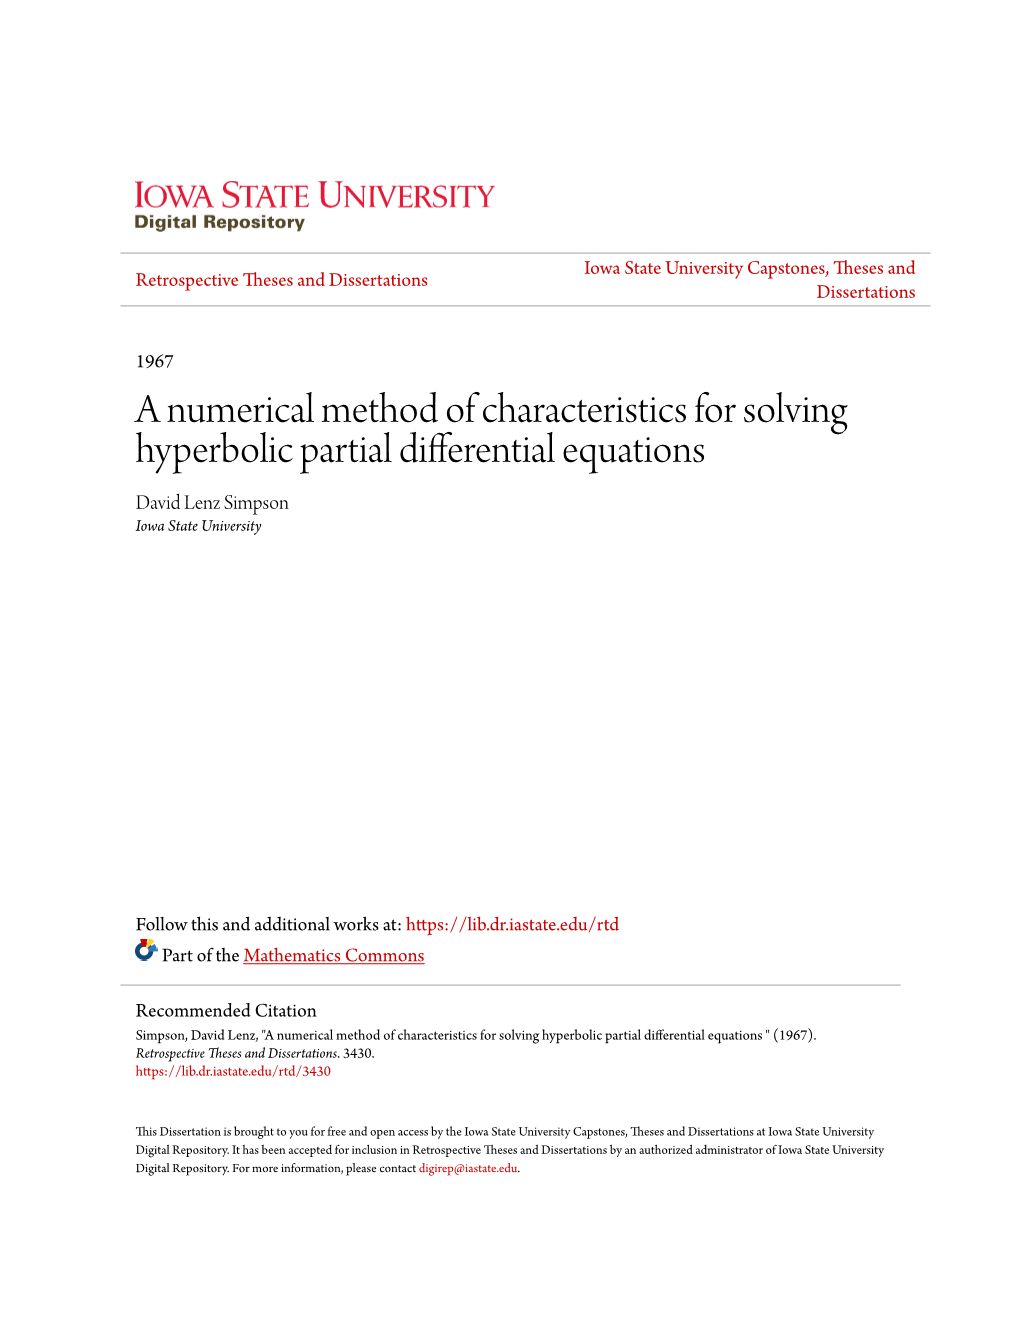 A Numerical Method of Characteristics for Solving Hyperbolic Partial Differential Equations David Lenz Simpson Iowa State University